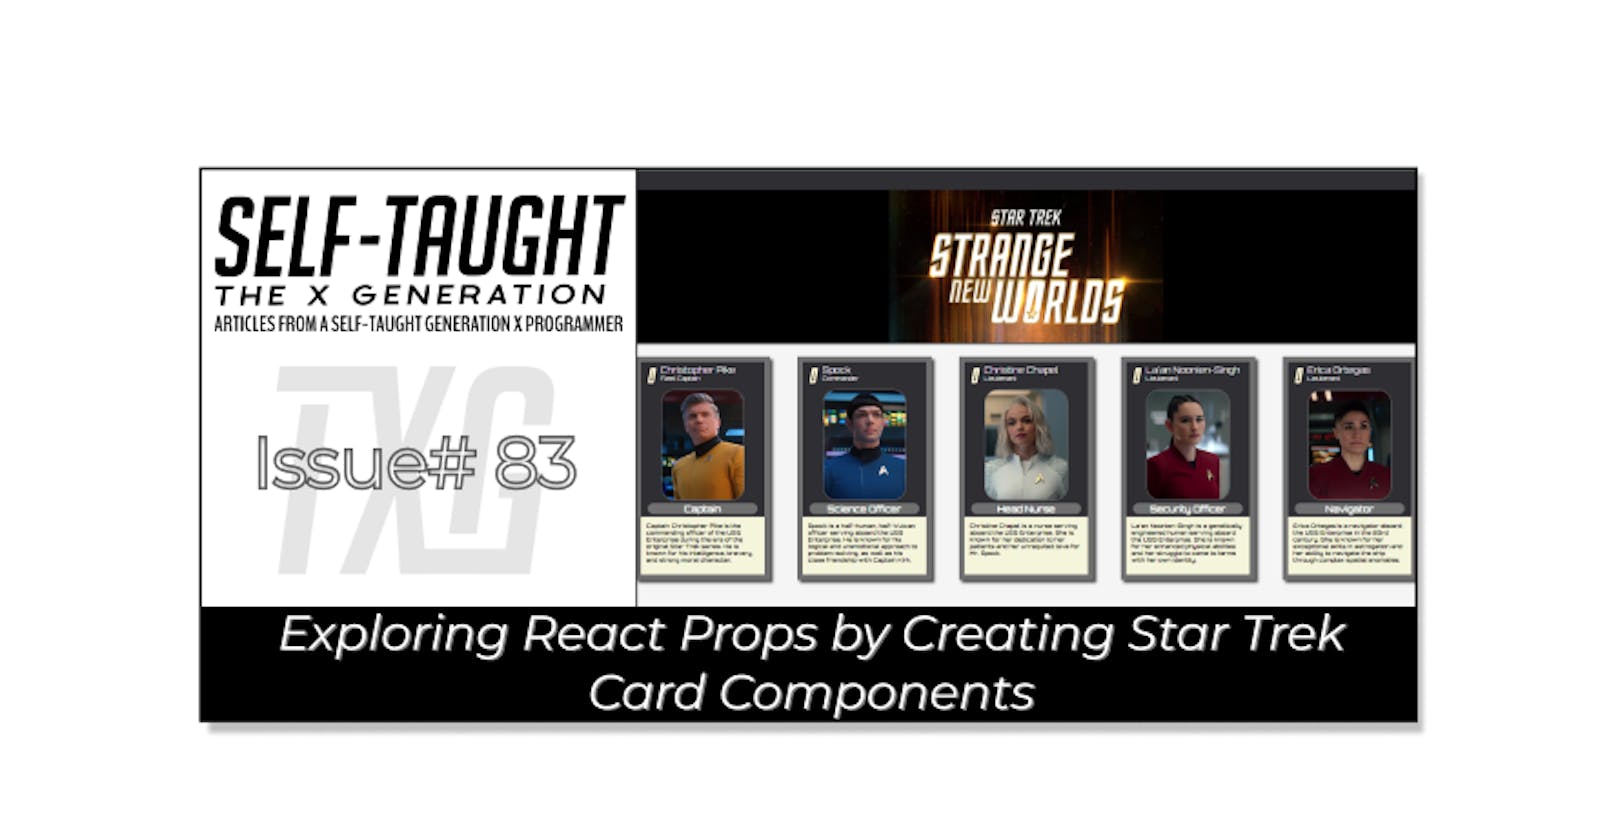 Exploring React Props by Creating Star Trek Card Components